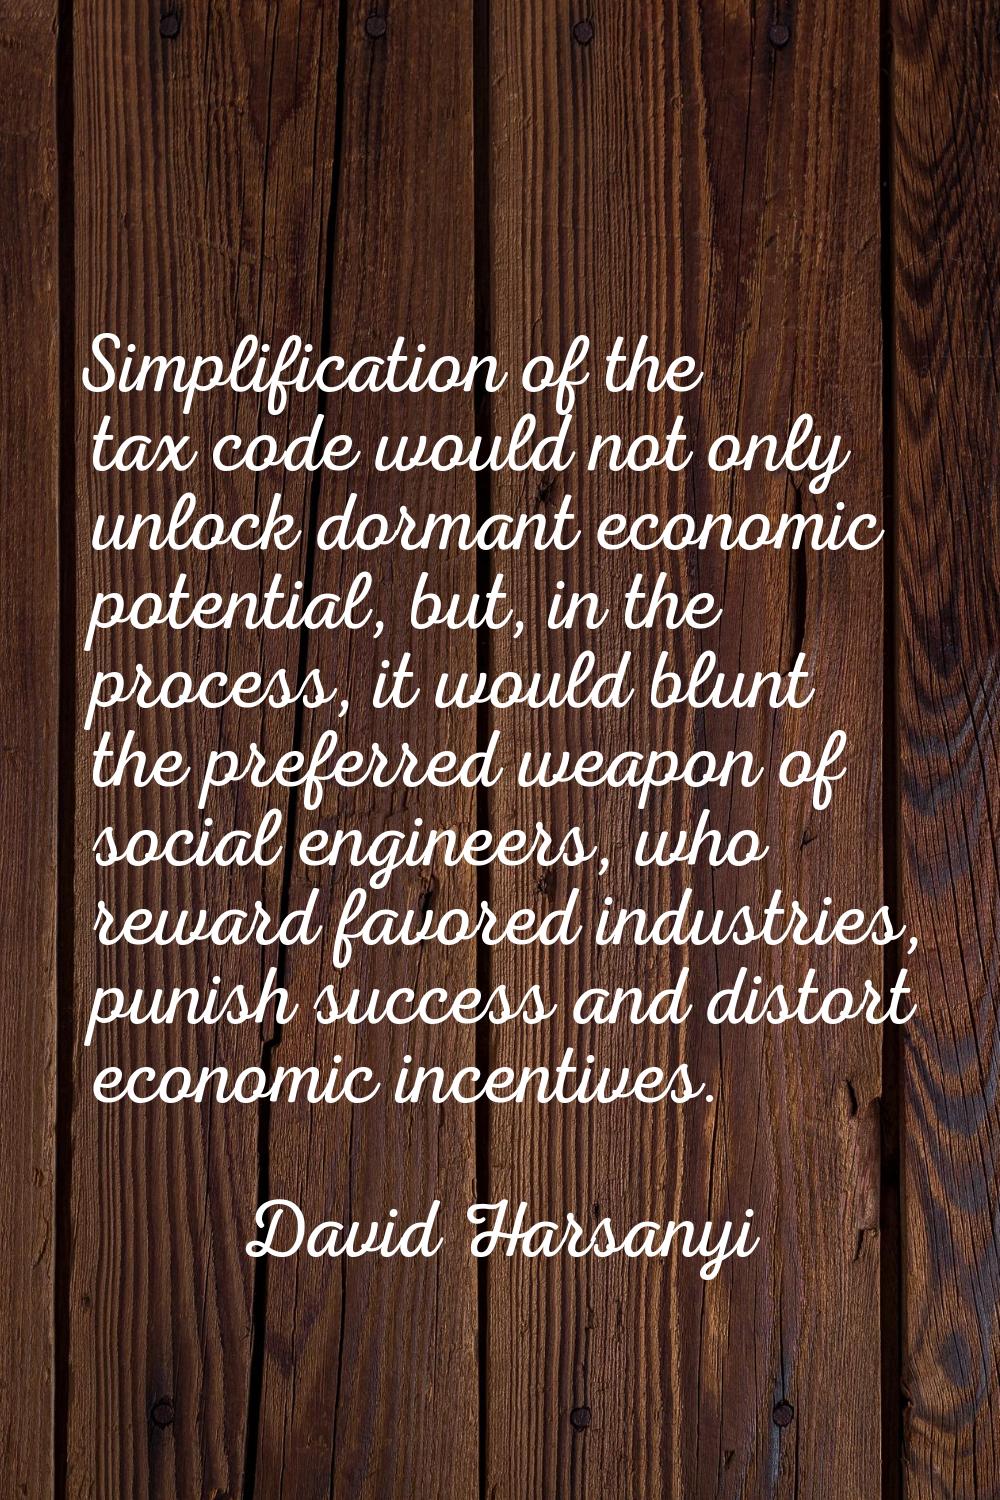 Simplification of the tax code would not only unlock dormant economic potential, but, in the proces